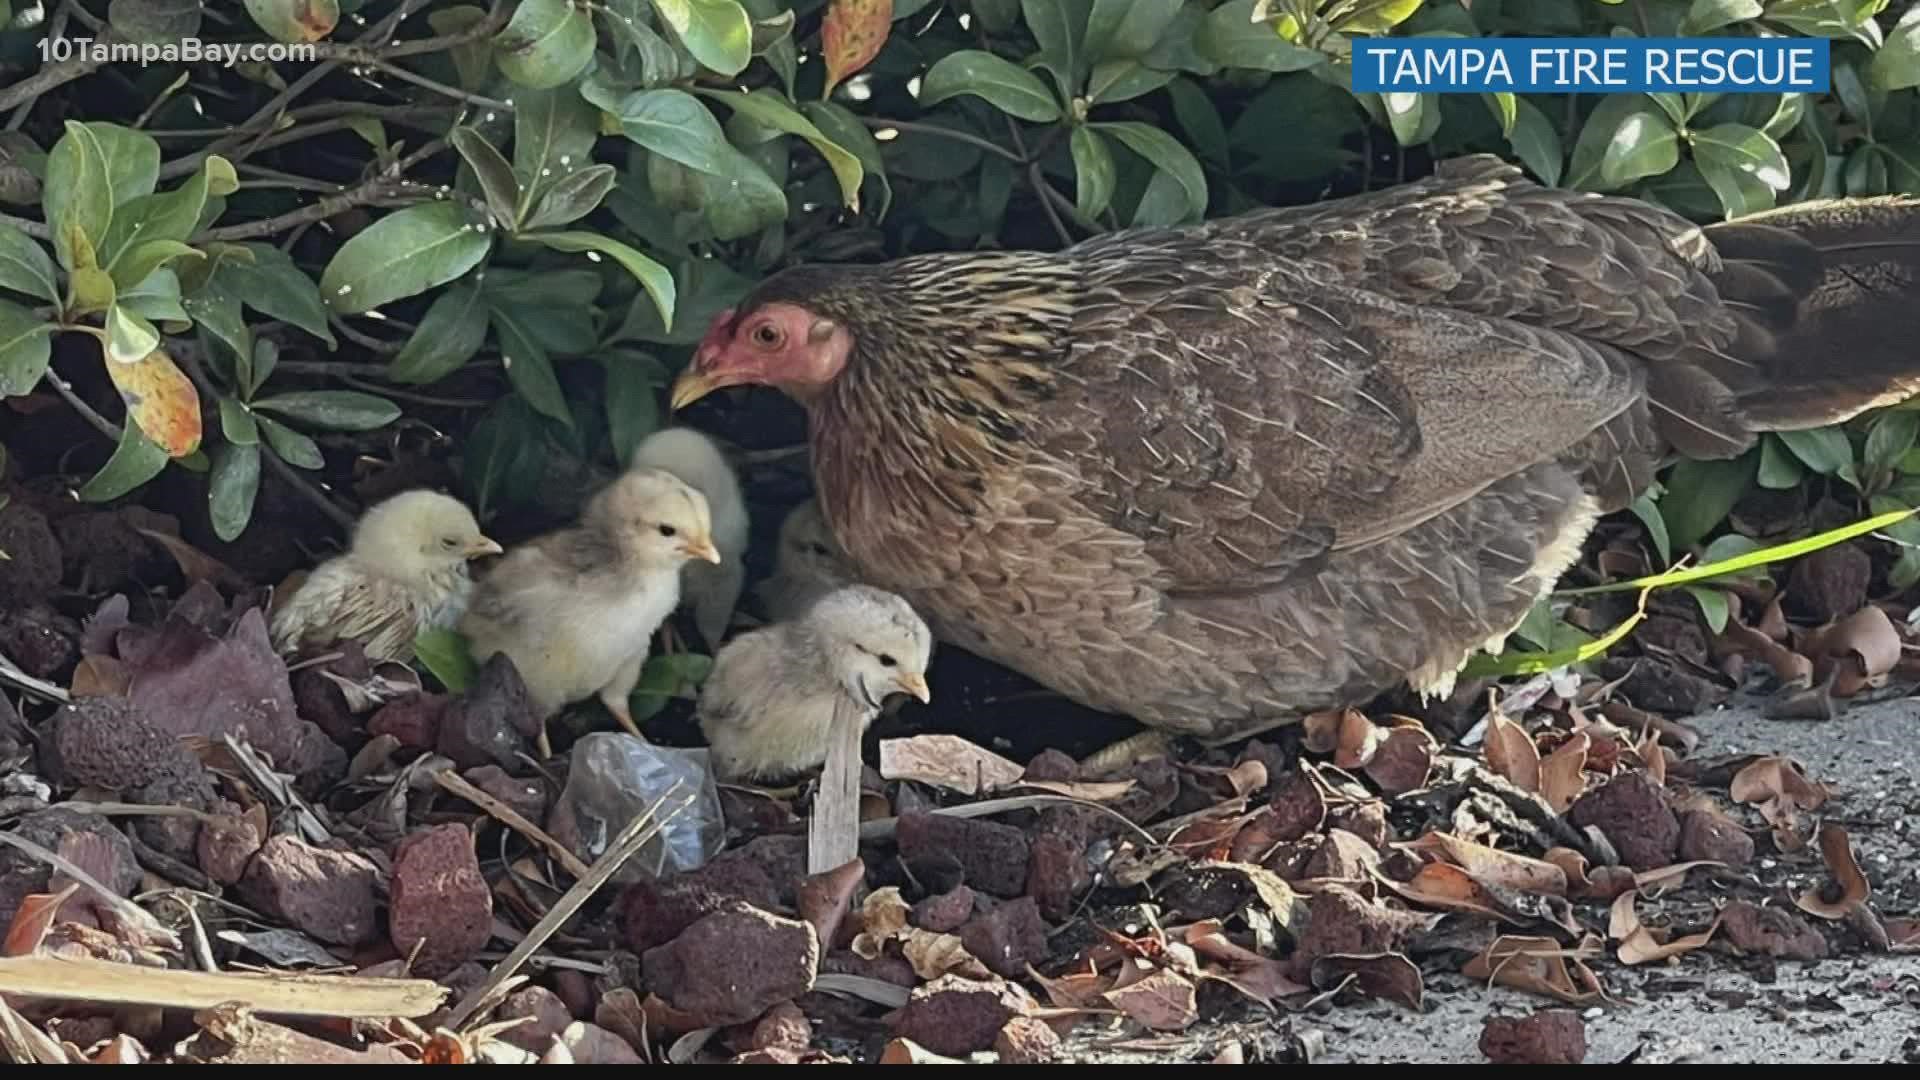 Thanks to the fire department, one mother hen is back with her babies.